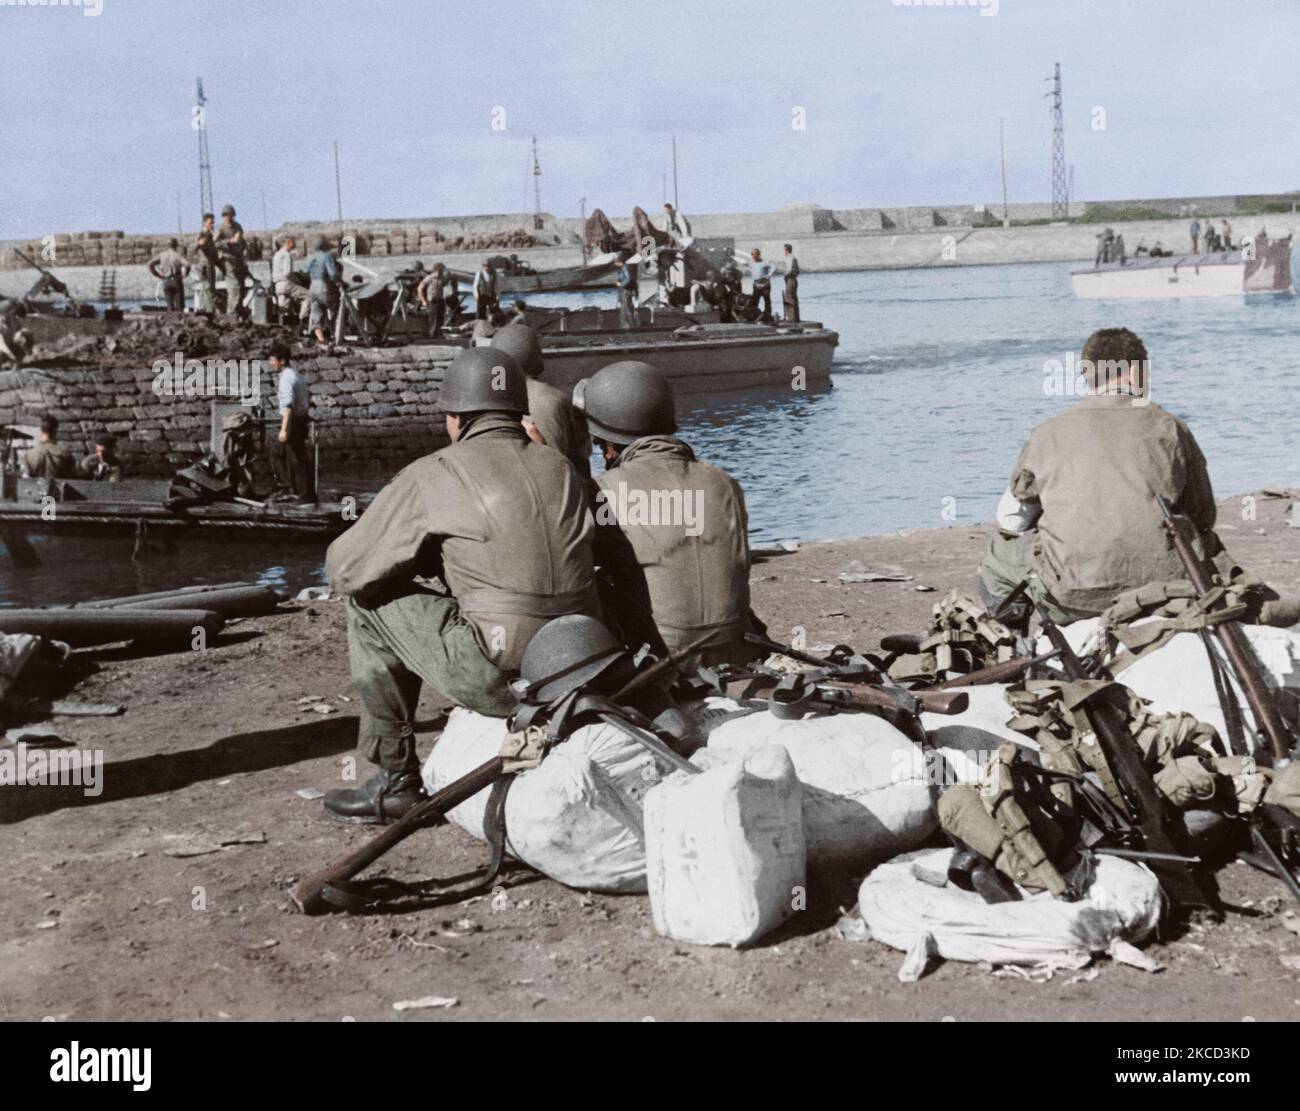 U.S. troops taking a break at the harbor after operations in Fedala, Morocco, circa 1942. Stock Photo